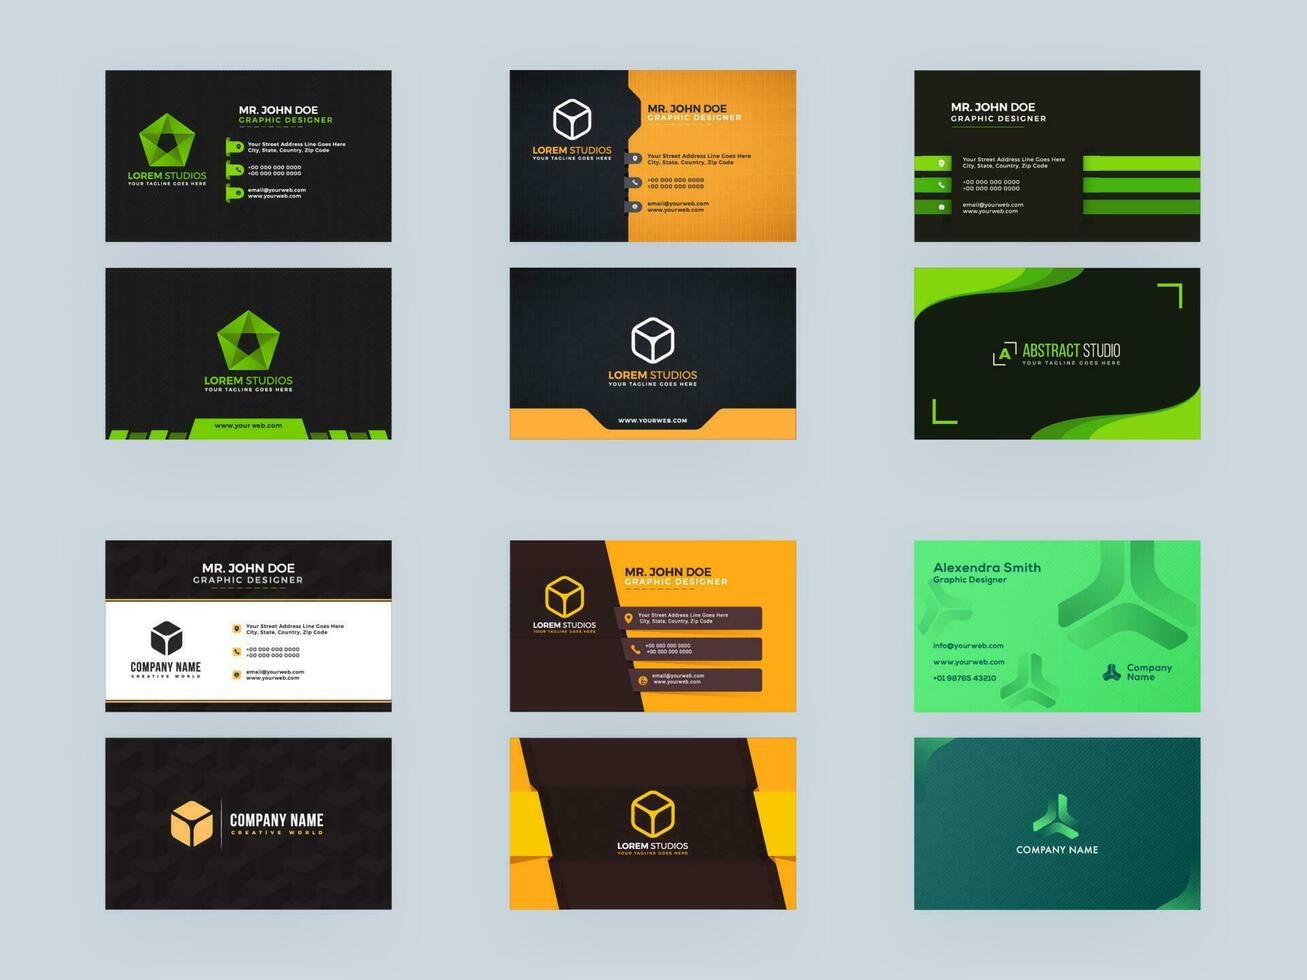 Promotional and Graphic Designer Business Card Template Set in Front and Back View. vector